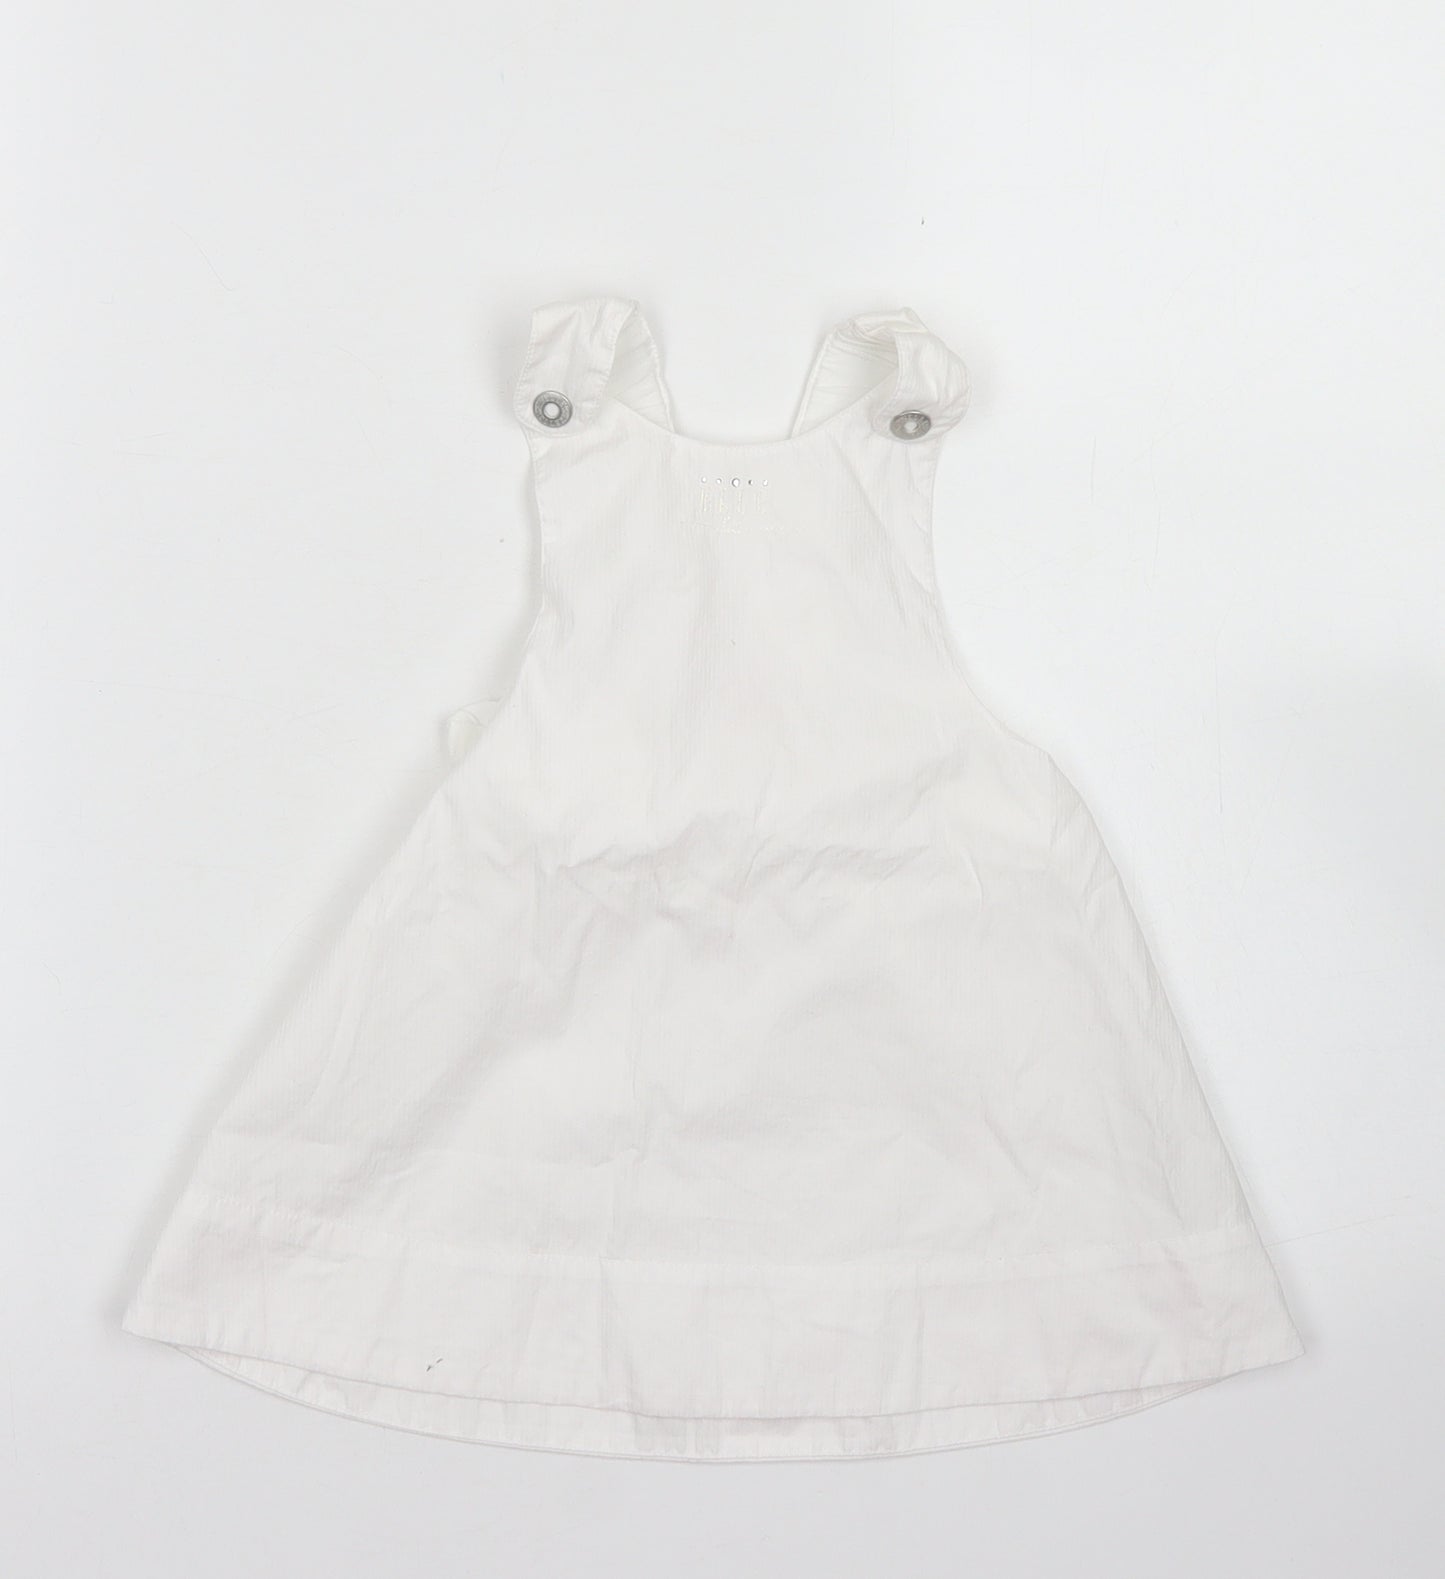 ELLE Girls White  Cotton Pinafore/Dungaree Dress  Size 12 Months  Square Neck Snap